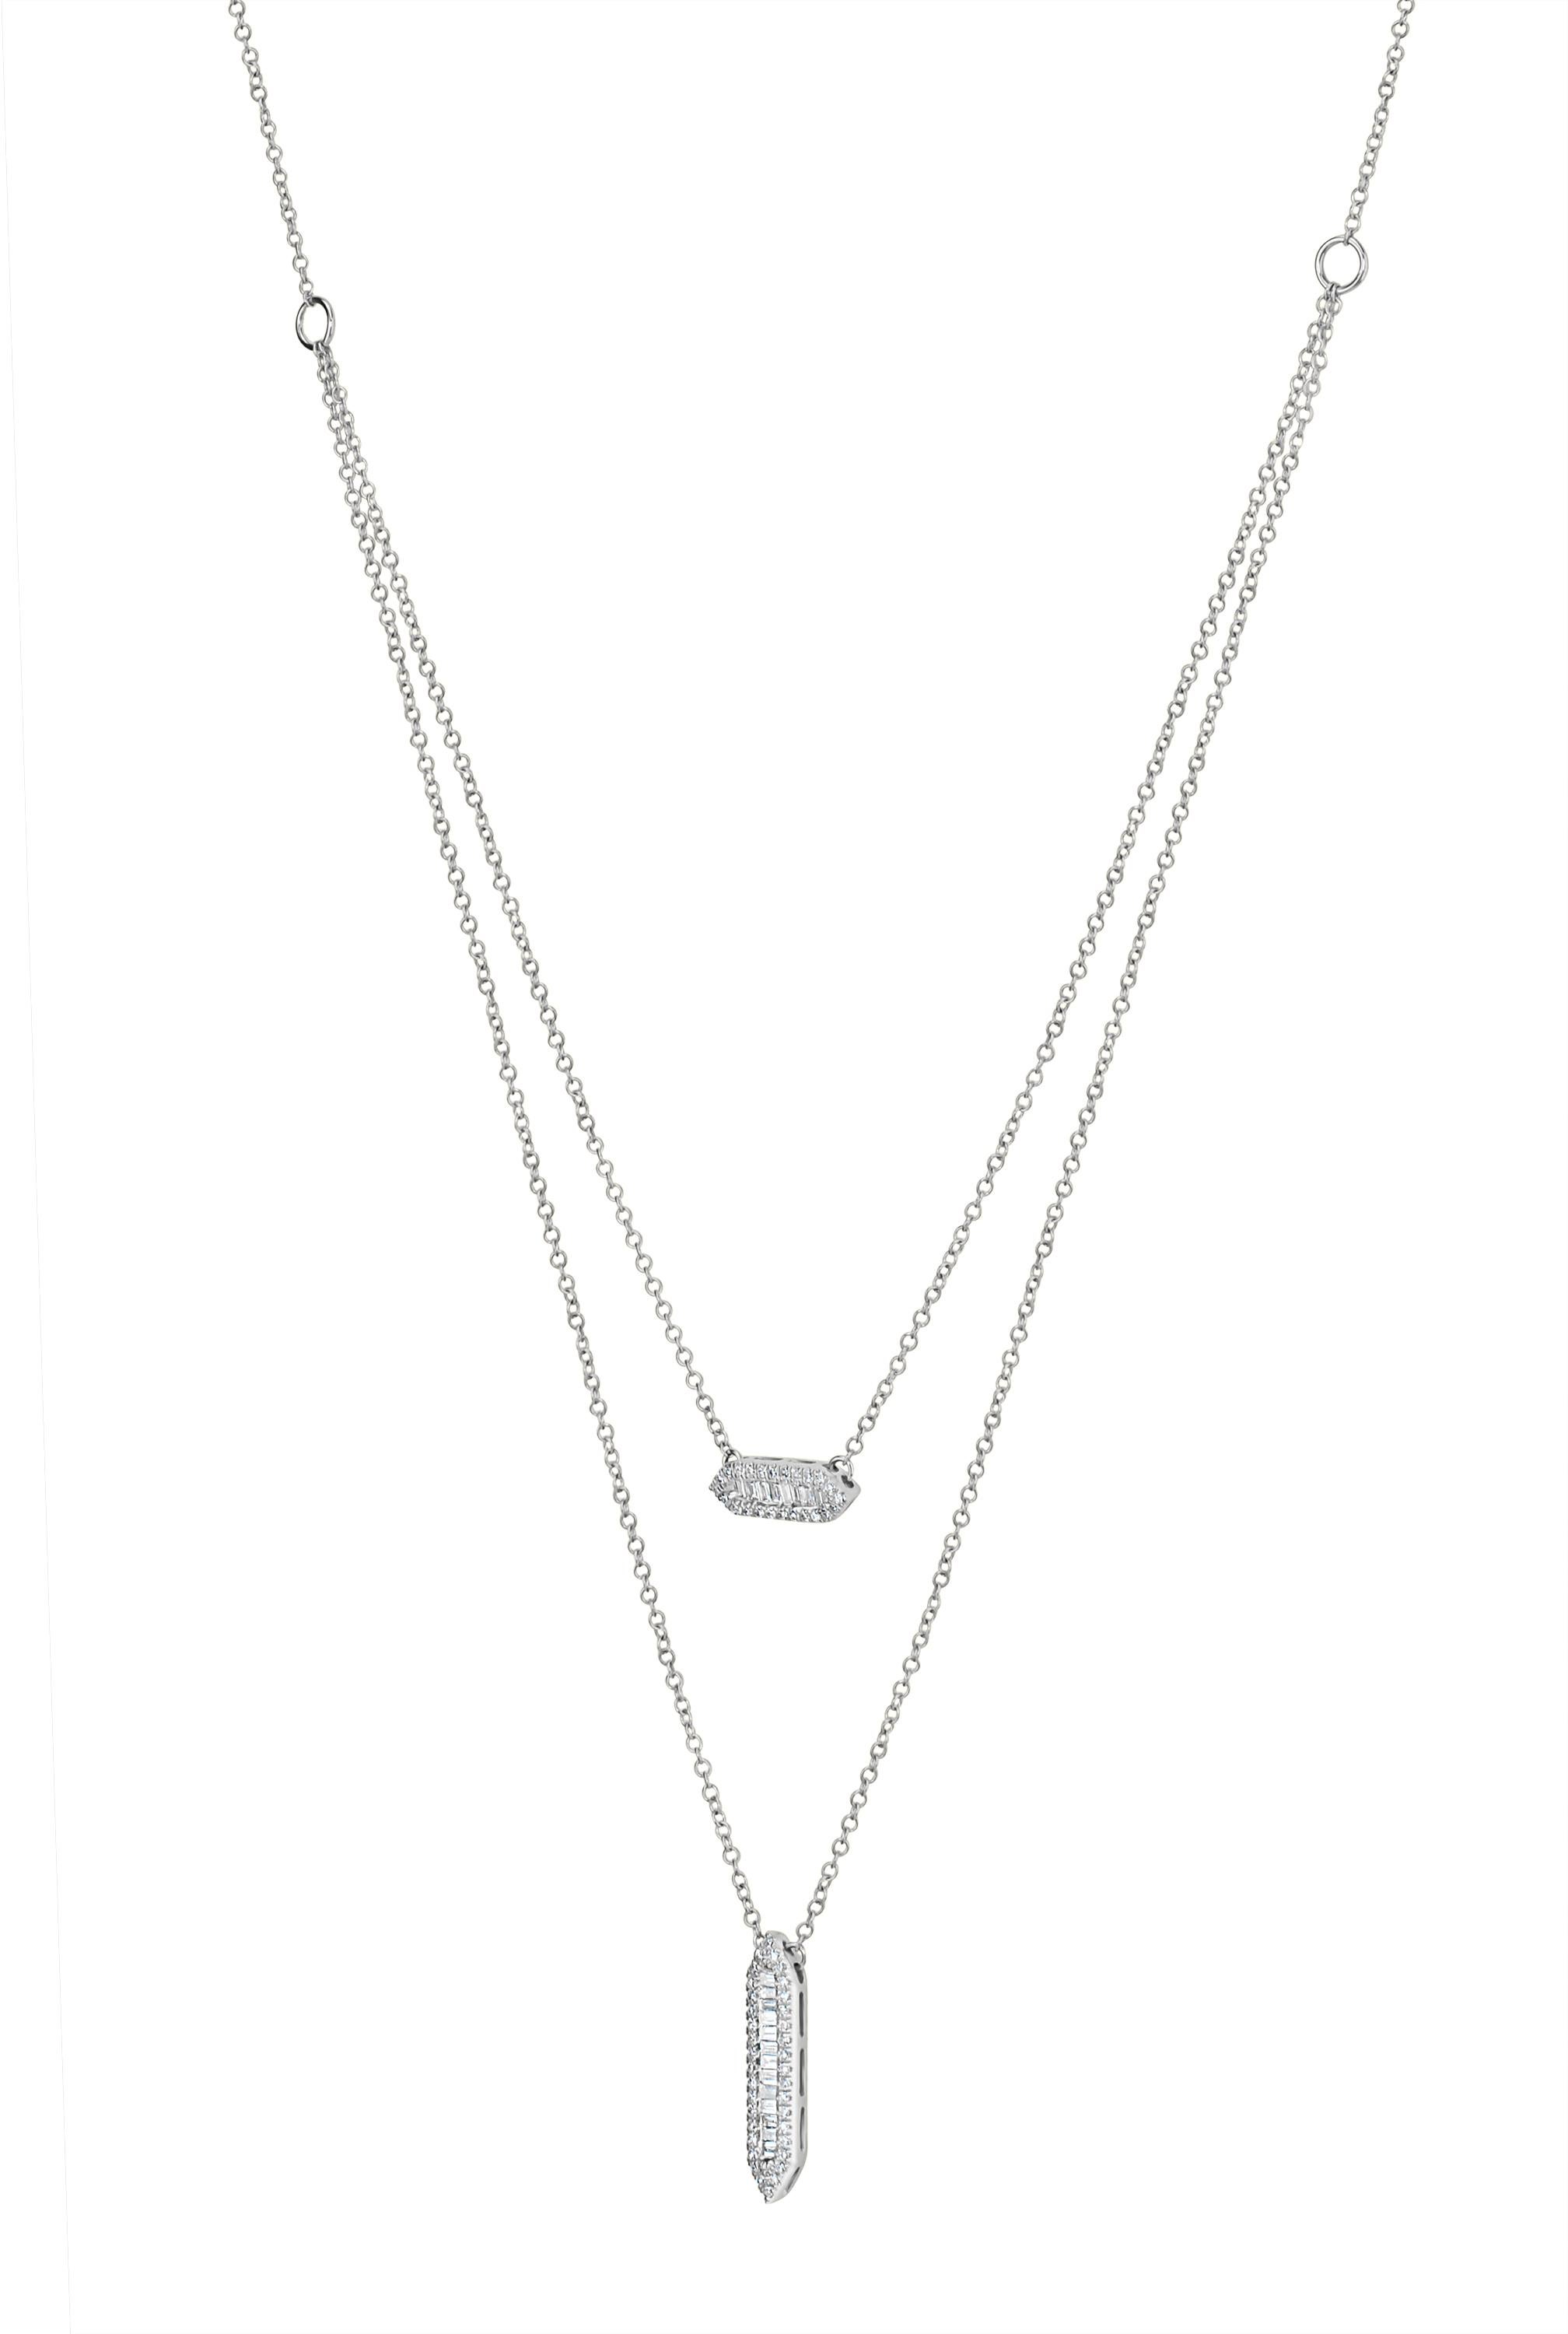 Layering never goes out of style with this Luxle stylish Round and Baguette Diamond Layered Pendant Necklace. Rendered in gleaming 14K white gold this necklace sparkles with baguette and round diamonds totaling 0.42Cts embellished in two hexagonal